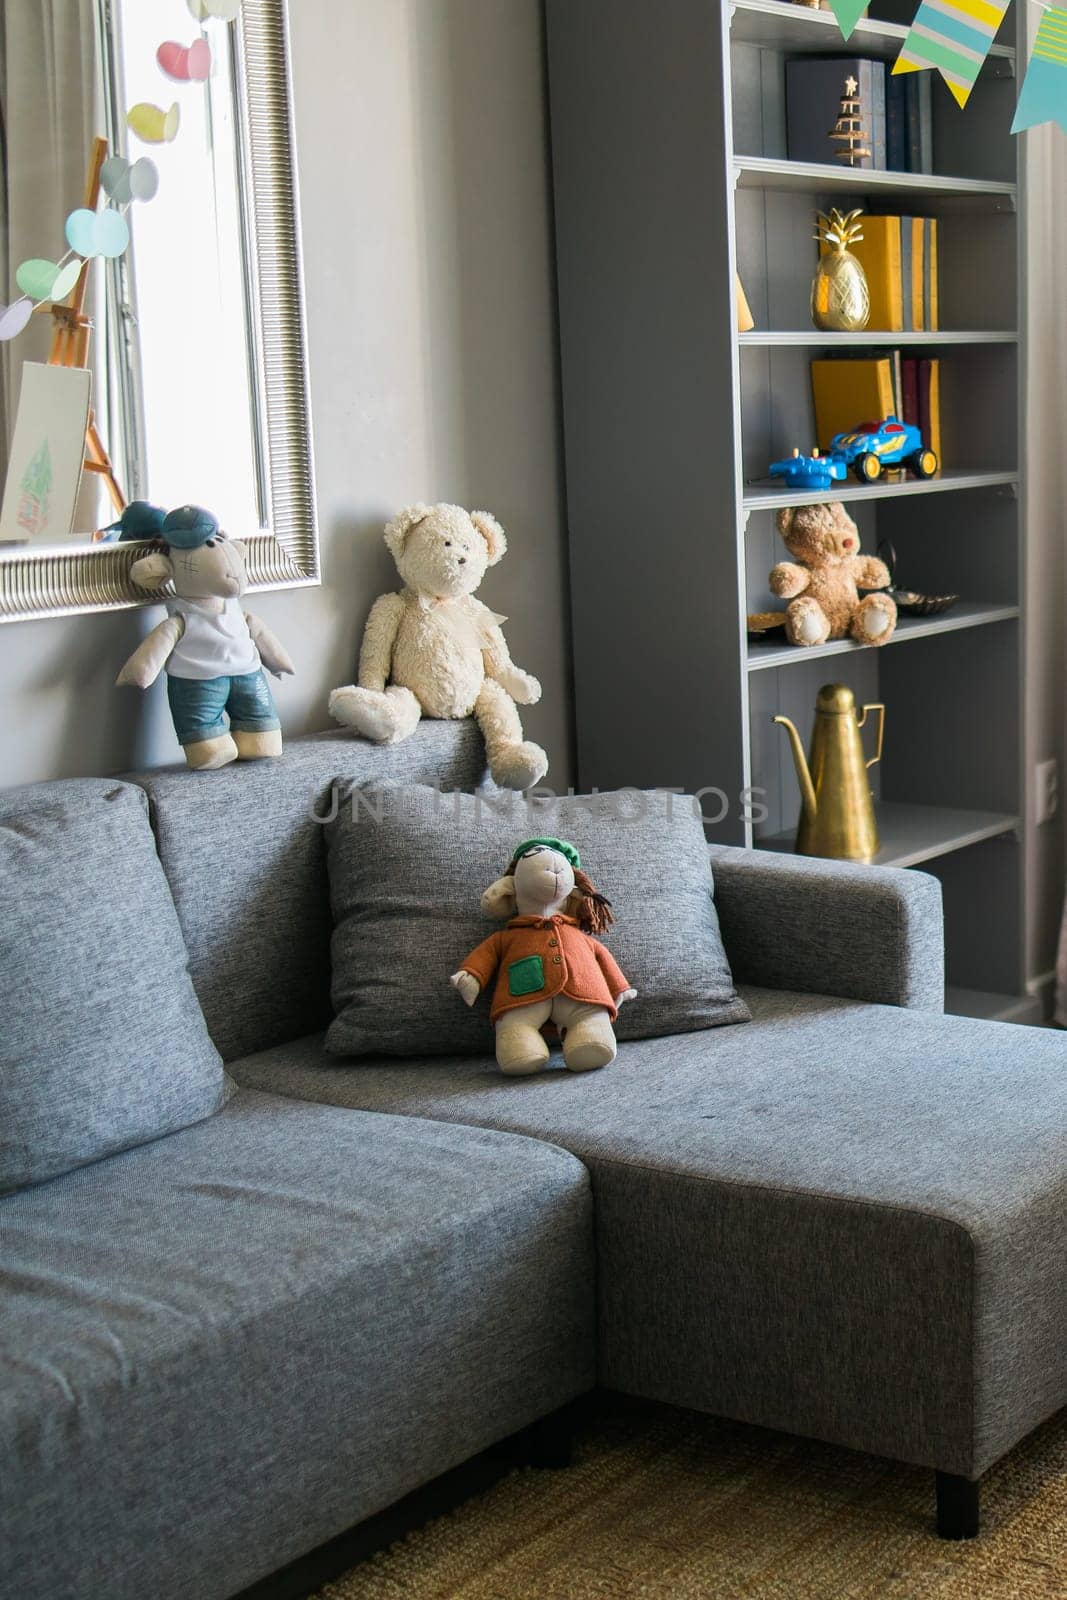 Stylish scandinavian nursery interior with shelves teddy bear and toys. Hanging flags cozy and sunny child room concept